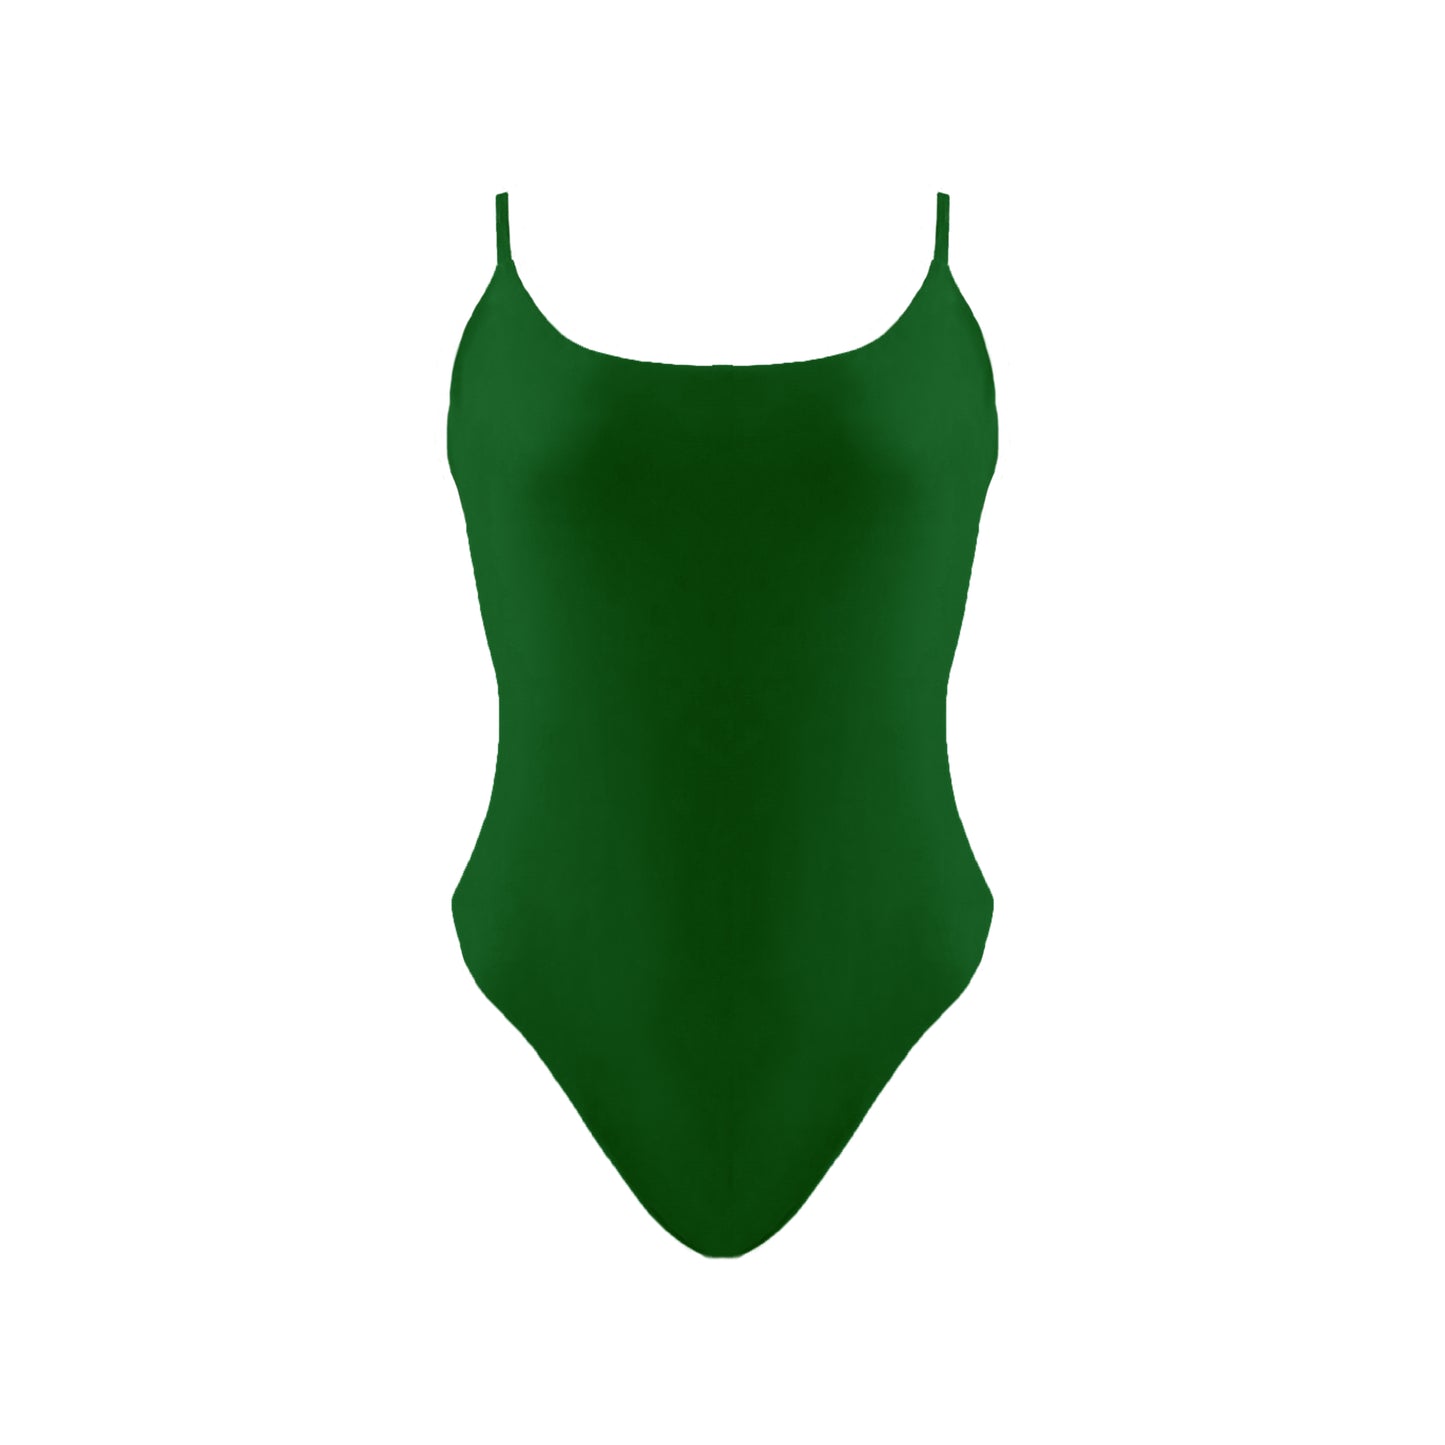 Forest Green Simplistic scoop neck one piece swimsuit with tie back, high cut legs and cheeky bum coverage.